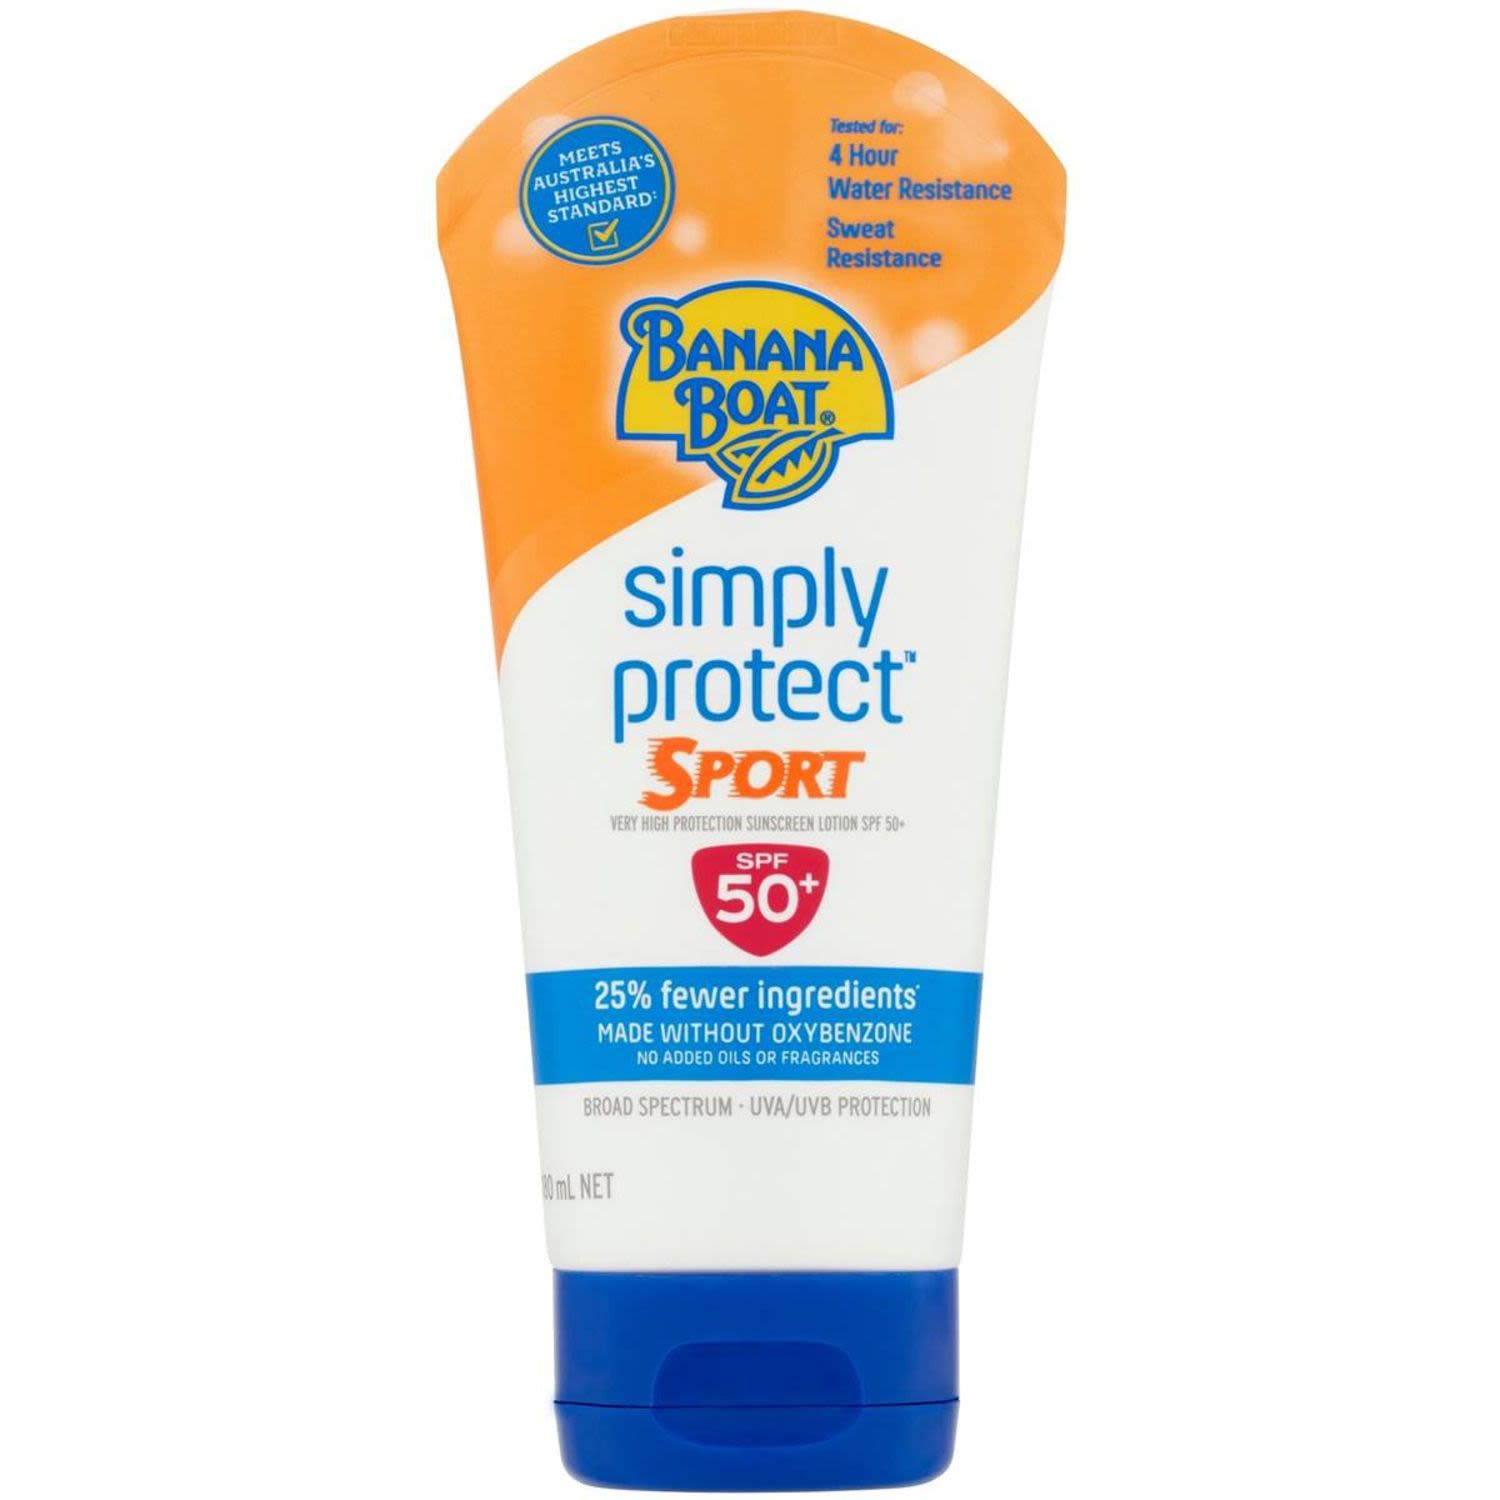 Banana Boat Simply Protect Sport Lotion SPF 50+, 180 Millilitre